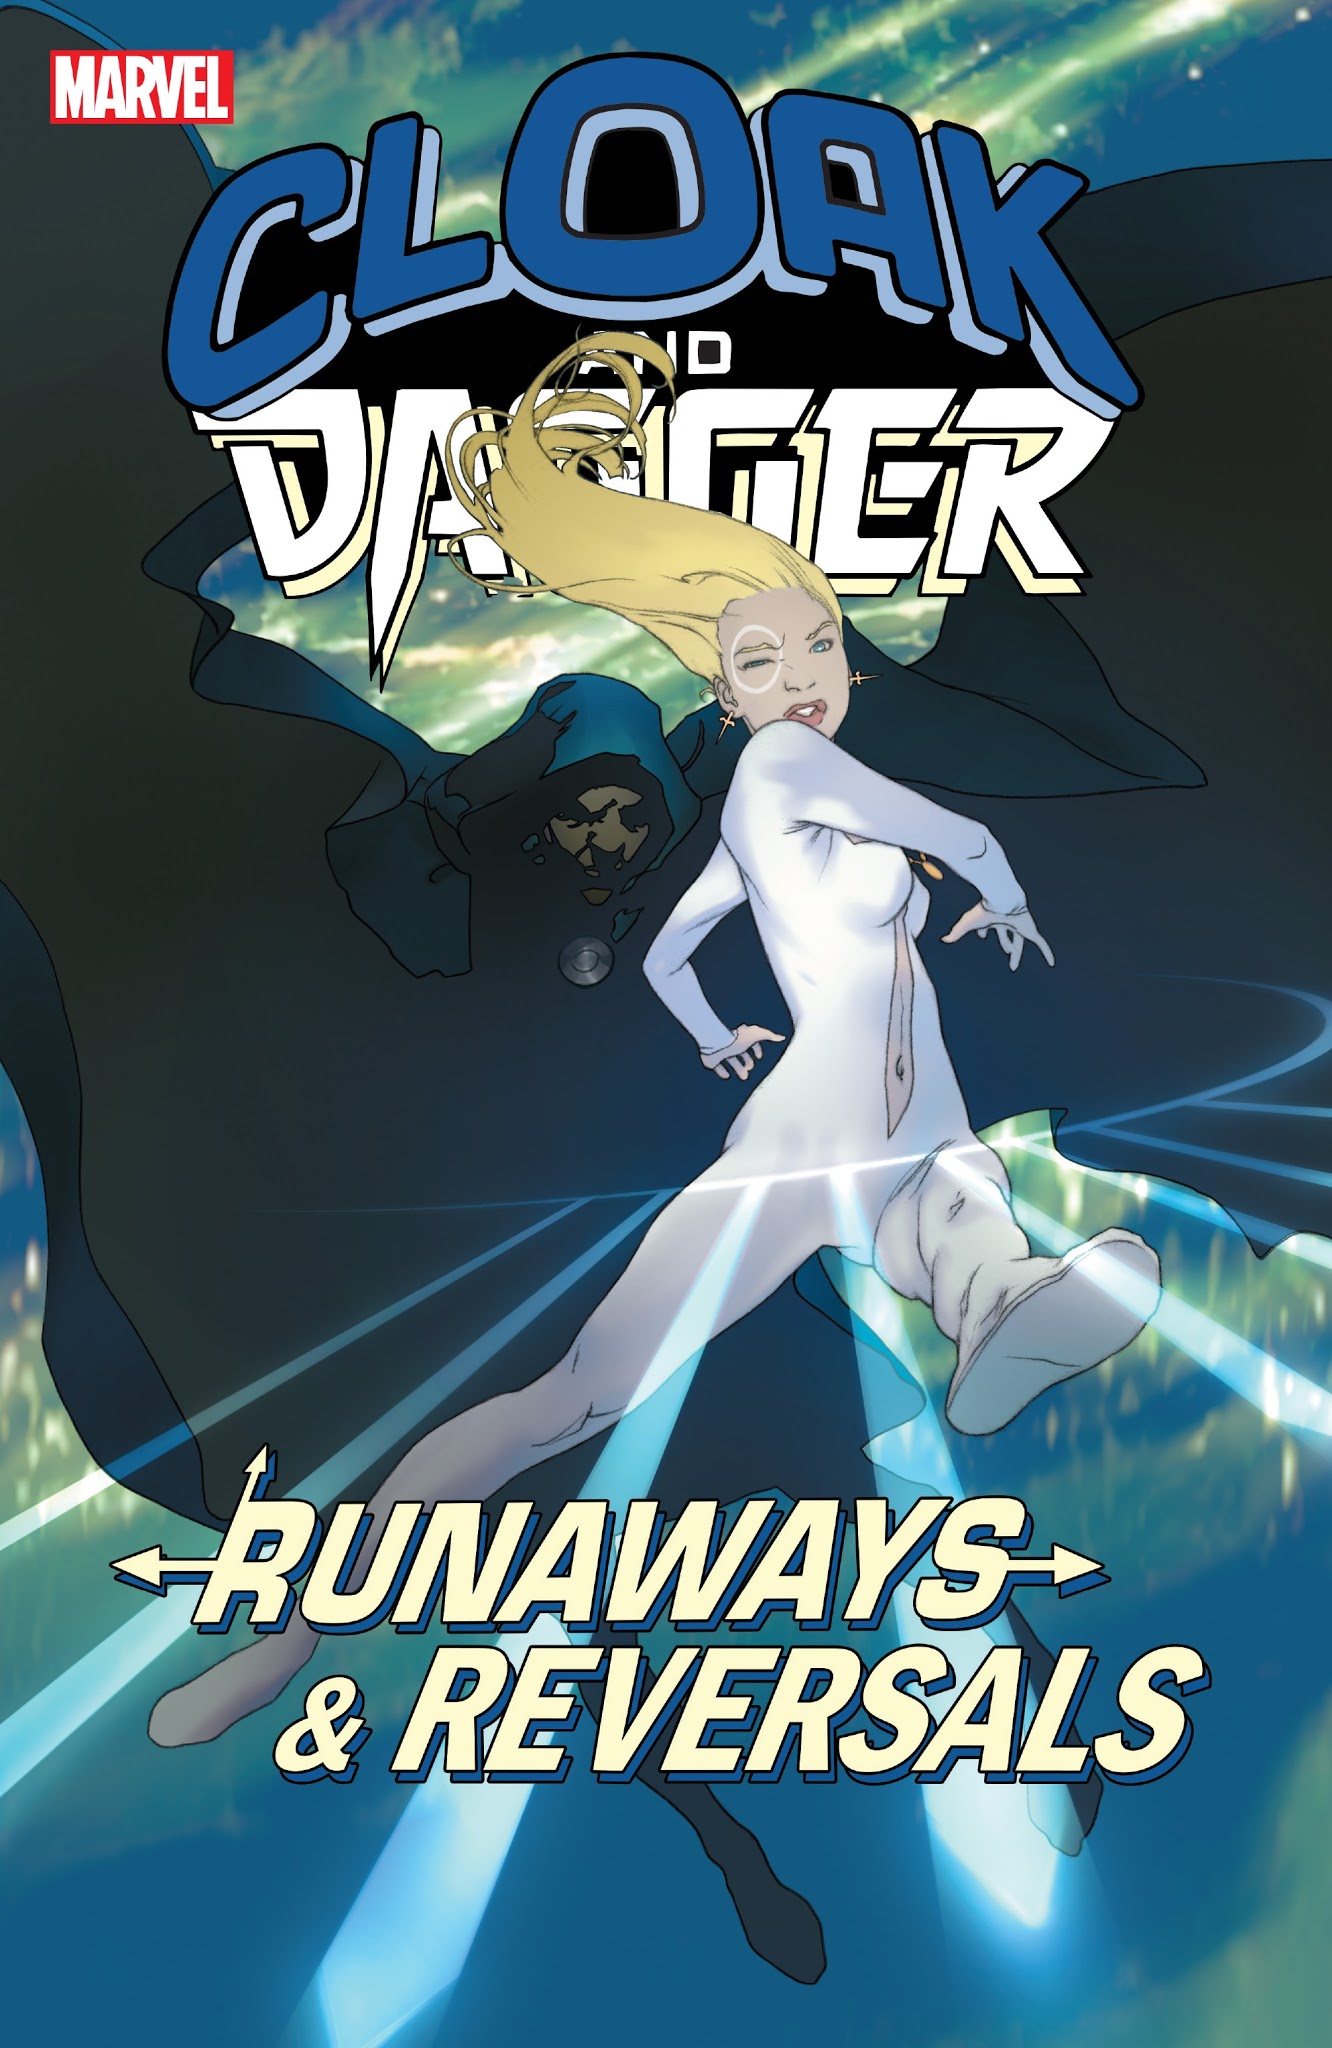 Read online Cloak and Dagger: Runaways and Reversals comic -  Issue # TPB - 1